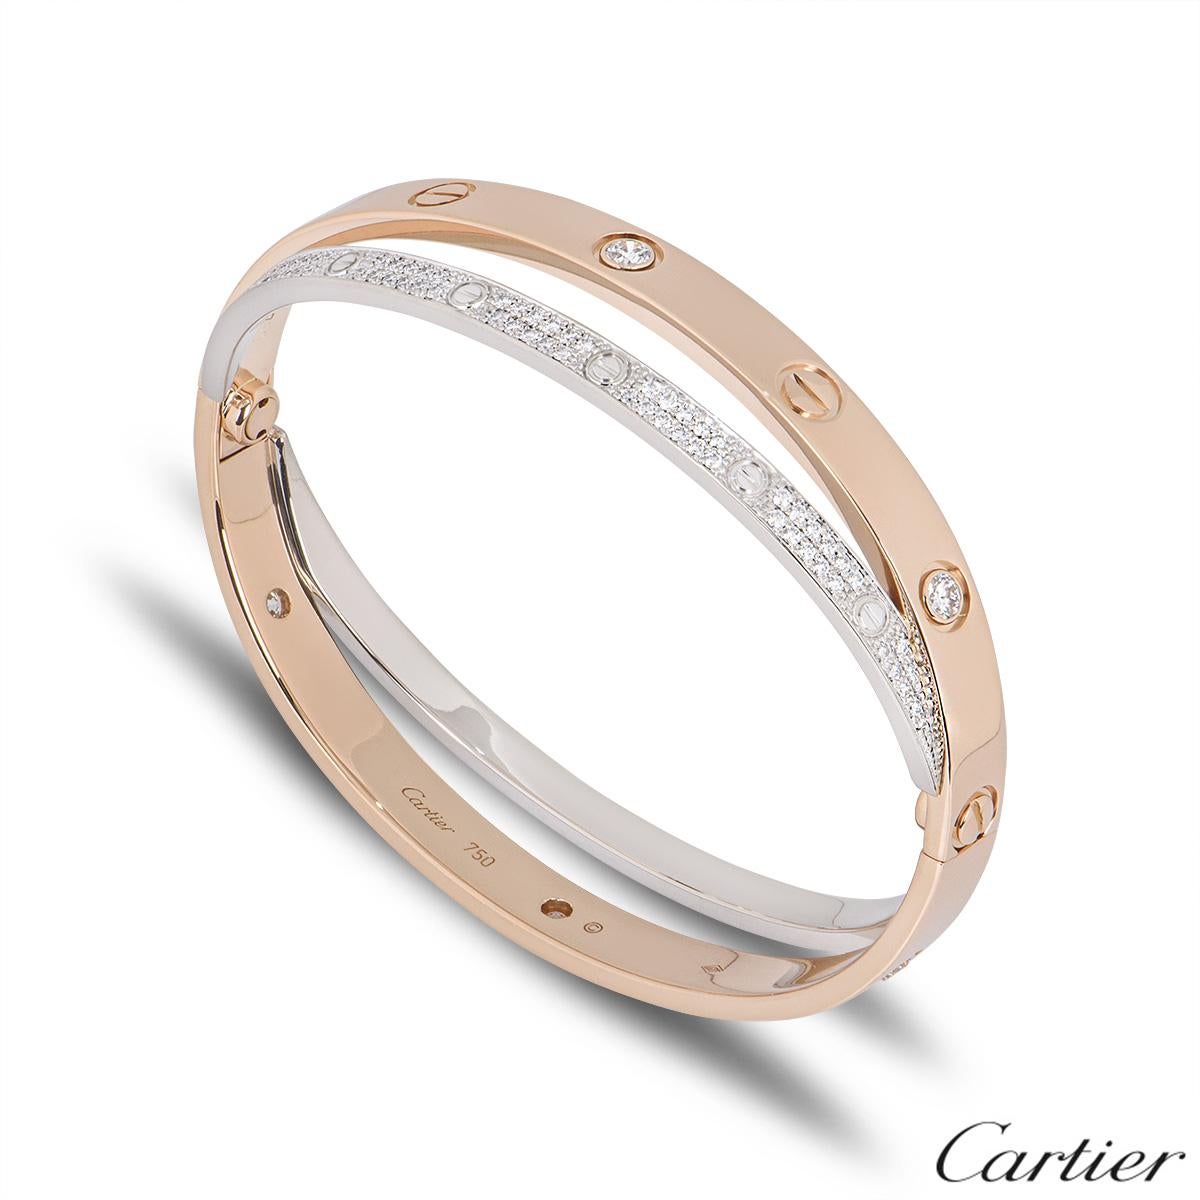 A double Cartier 18k rose and white gold Love bangle. The rose gold bangle is set with 6 round brilliant cut diamonds and alternating screw motifs, interlinking with it is a fully diamond paved 18k white gold band on either side also displaying the